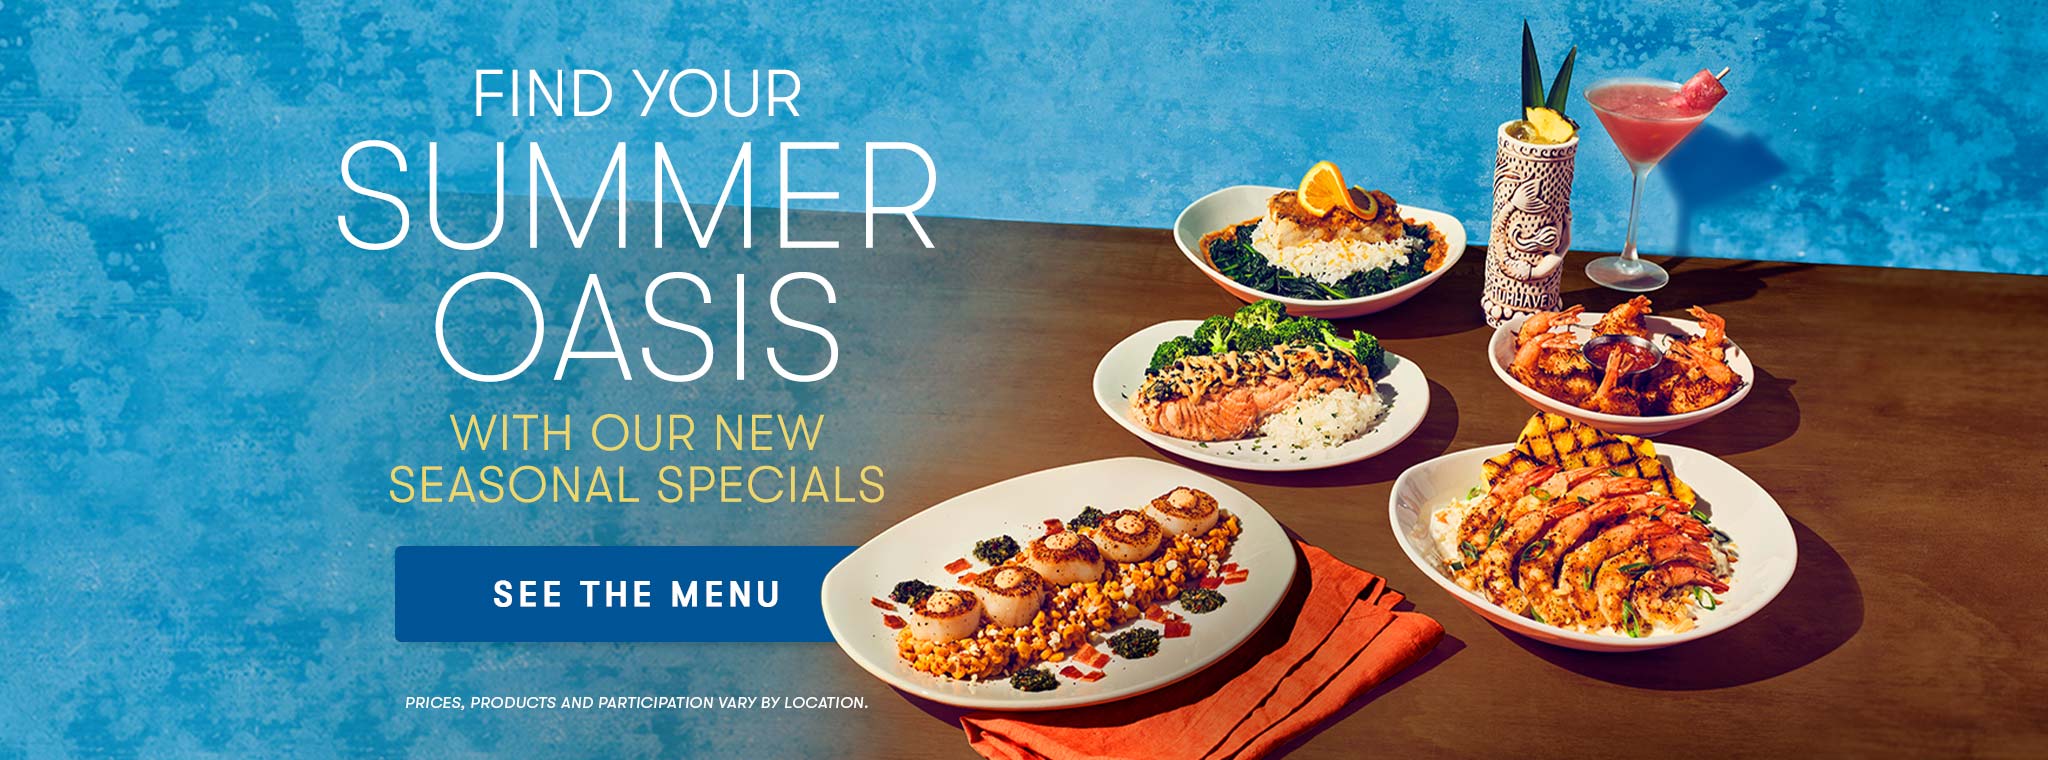 Find Your Summer Oasis With Our New Seasonal Specials